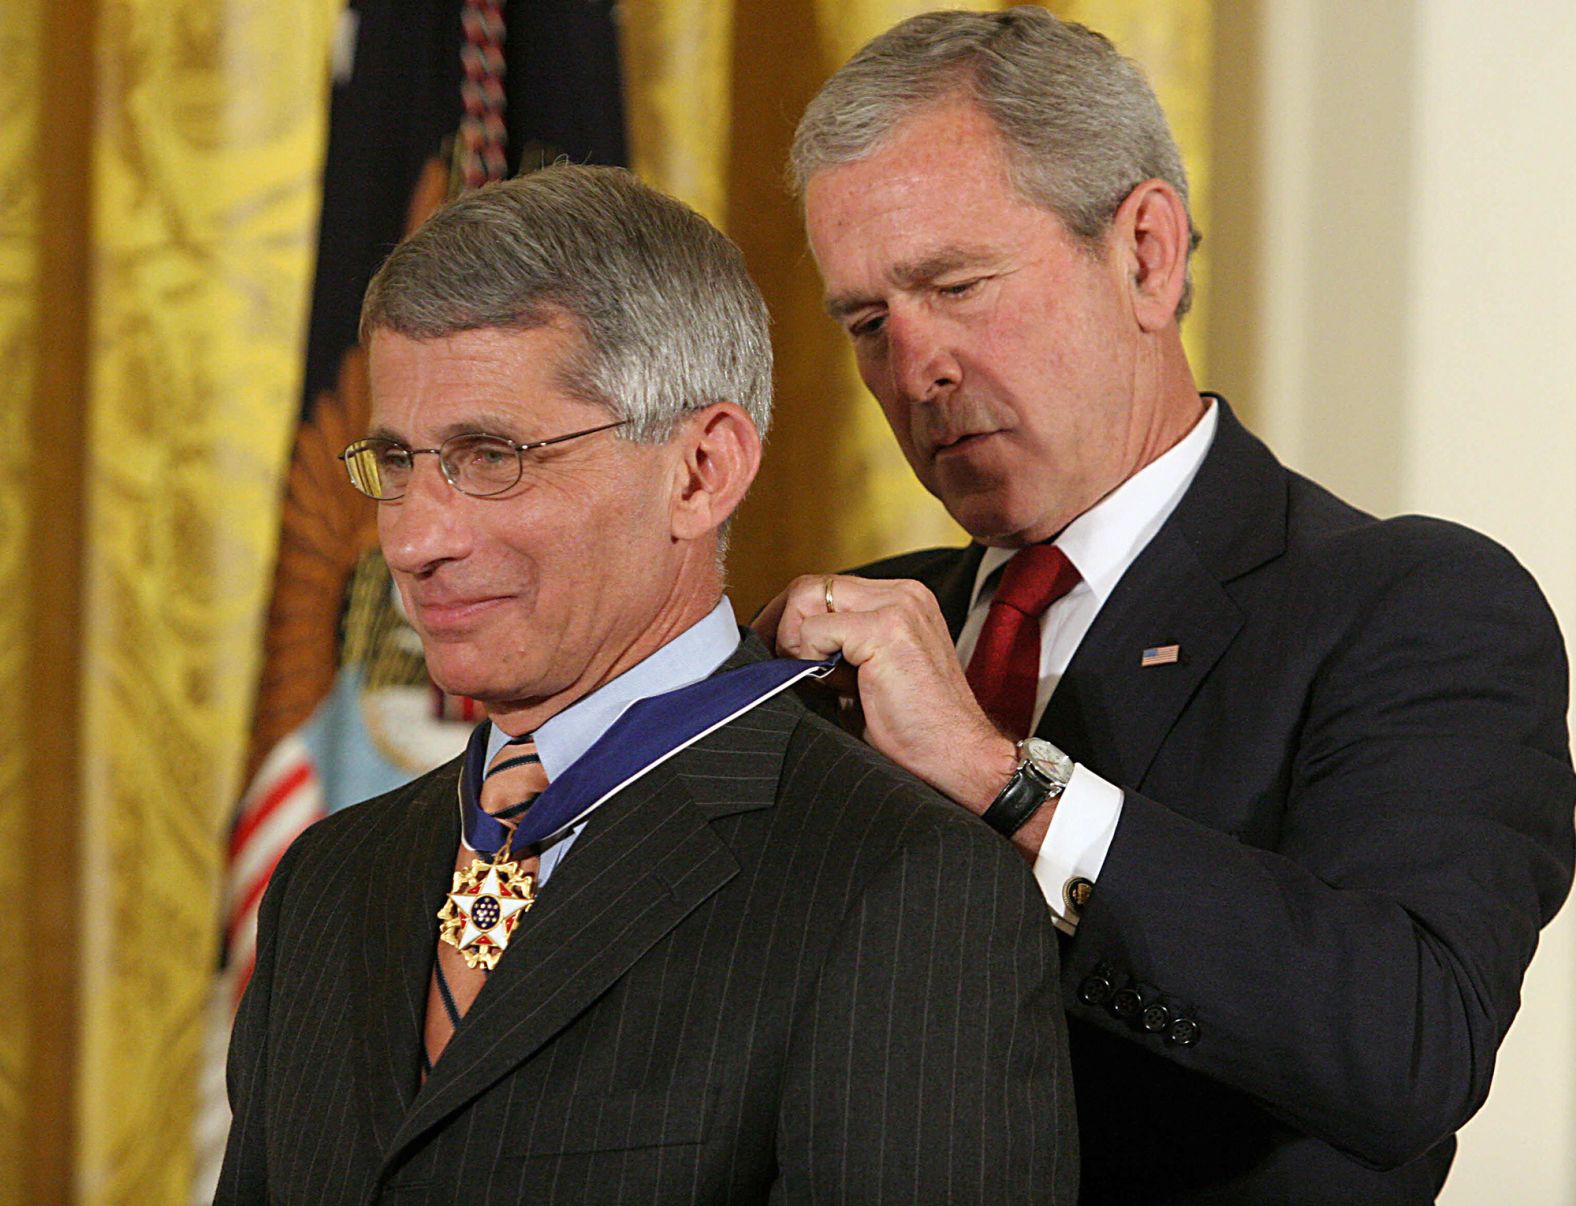 In 2008, US President George W. Bush presents the Presidential Medal of Freedom to Fauci "for his determined and aggressive efforts to help others live longer and healthier lives."